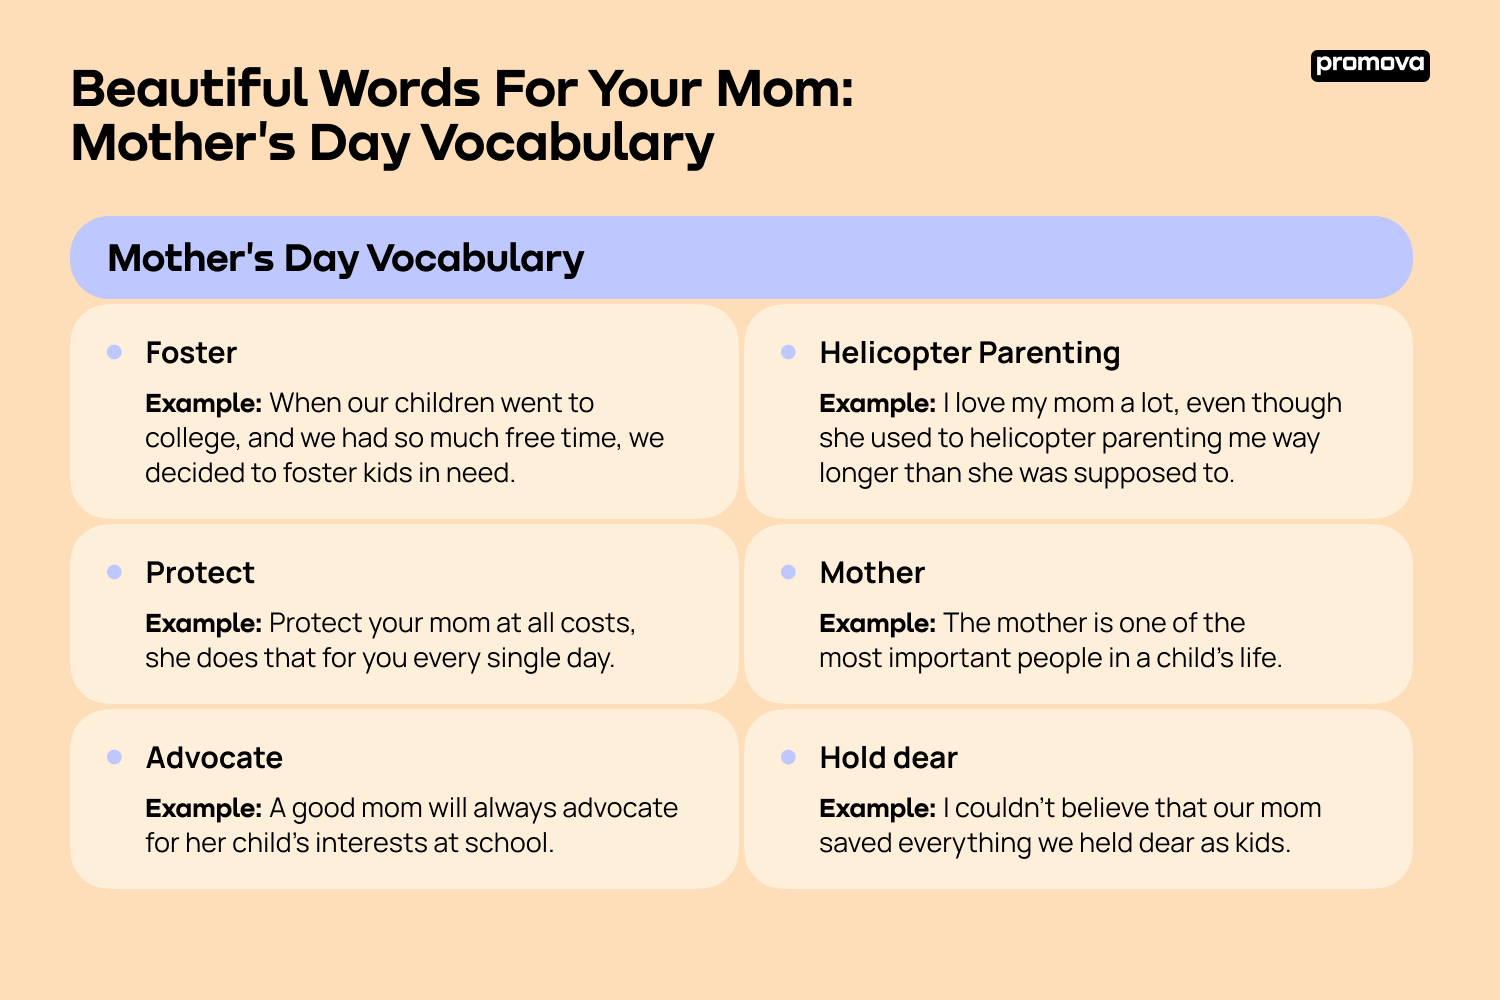 Discover Mother's Day Vocabulary